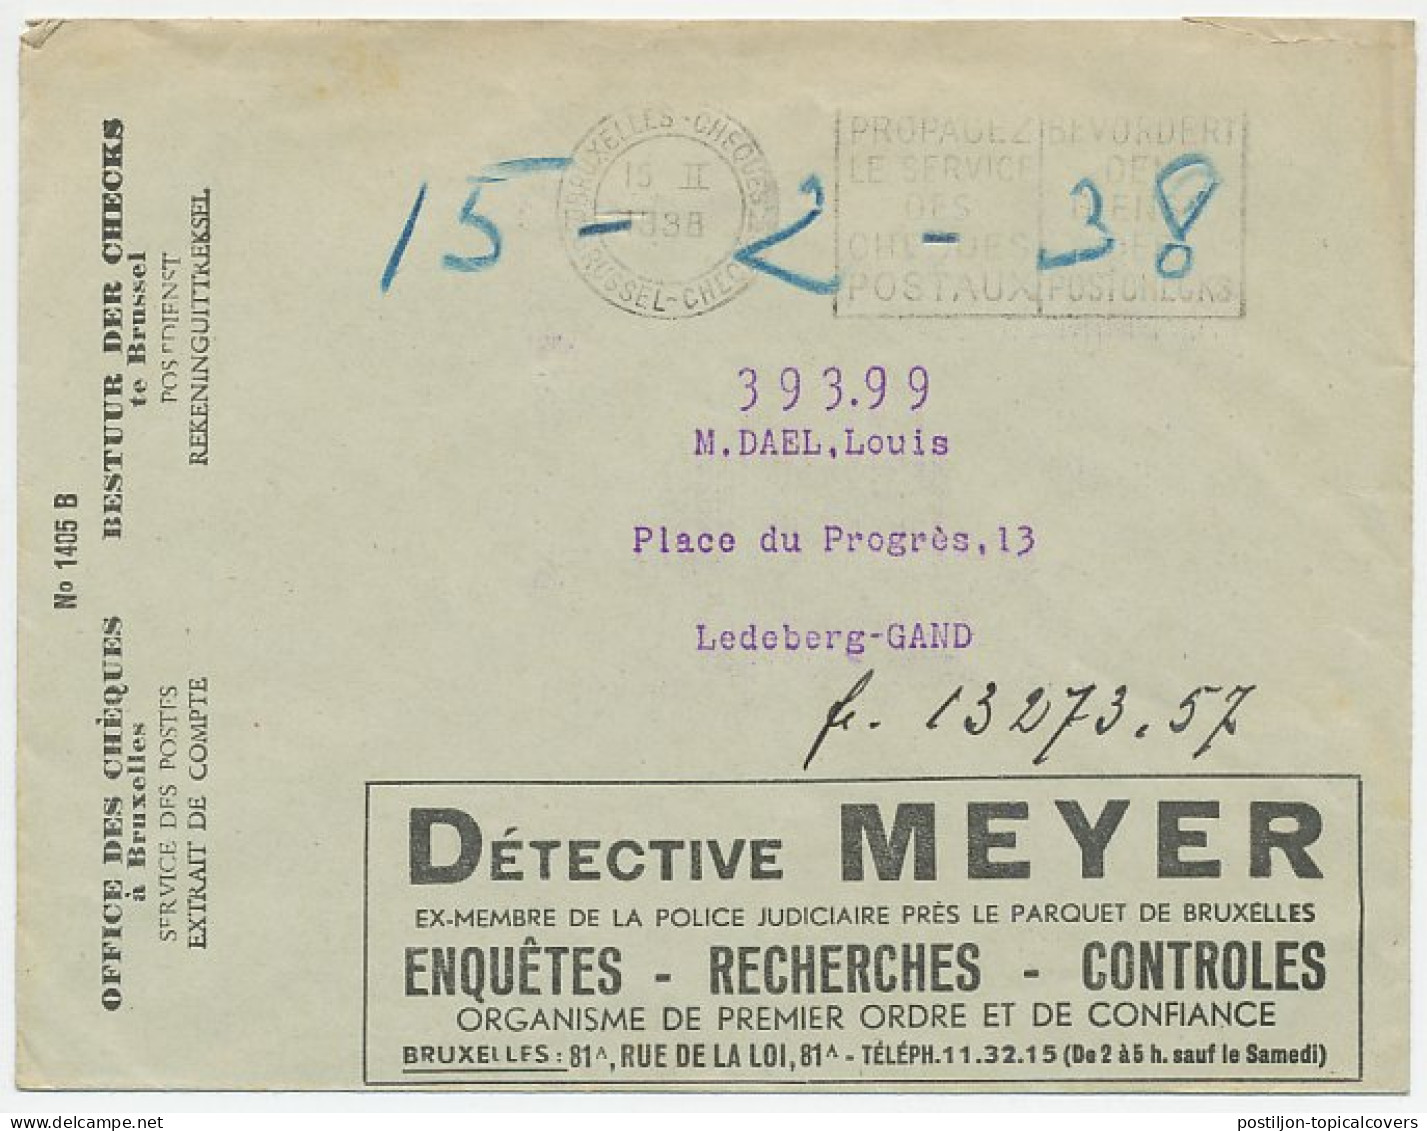 Postal Cheque Cover Belgium 1938 Leather - Soles - Heels - Shoes - Detective - Costumes